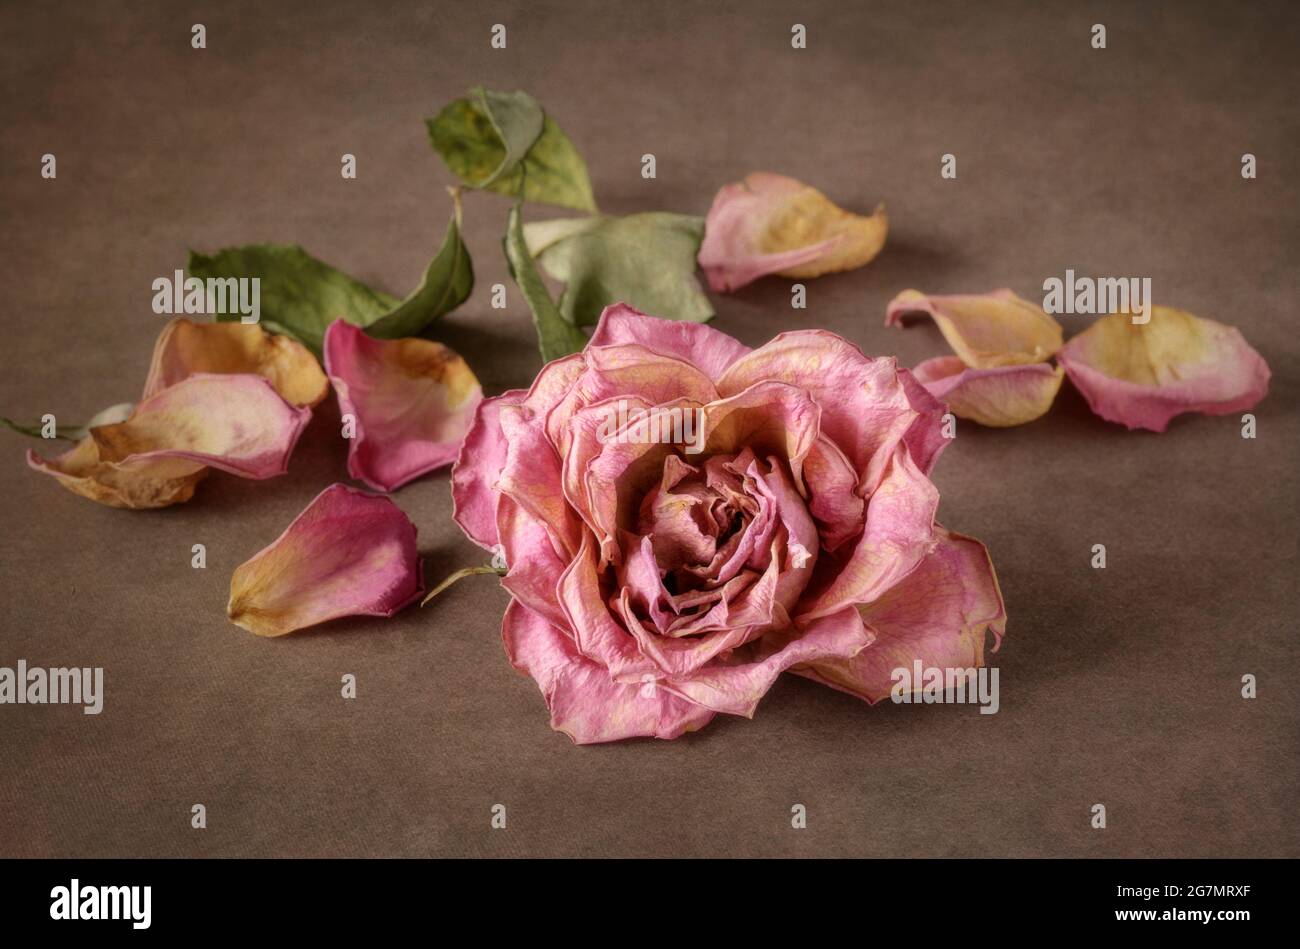 Wilted pink rose and rose petals Stock Photo